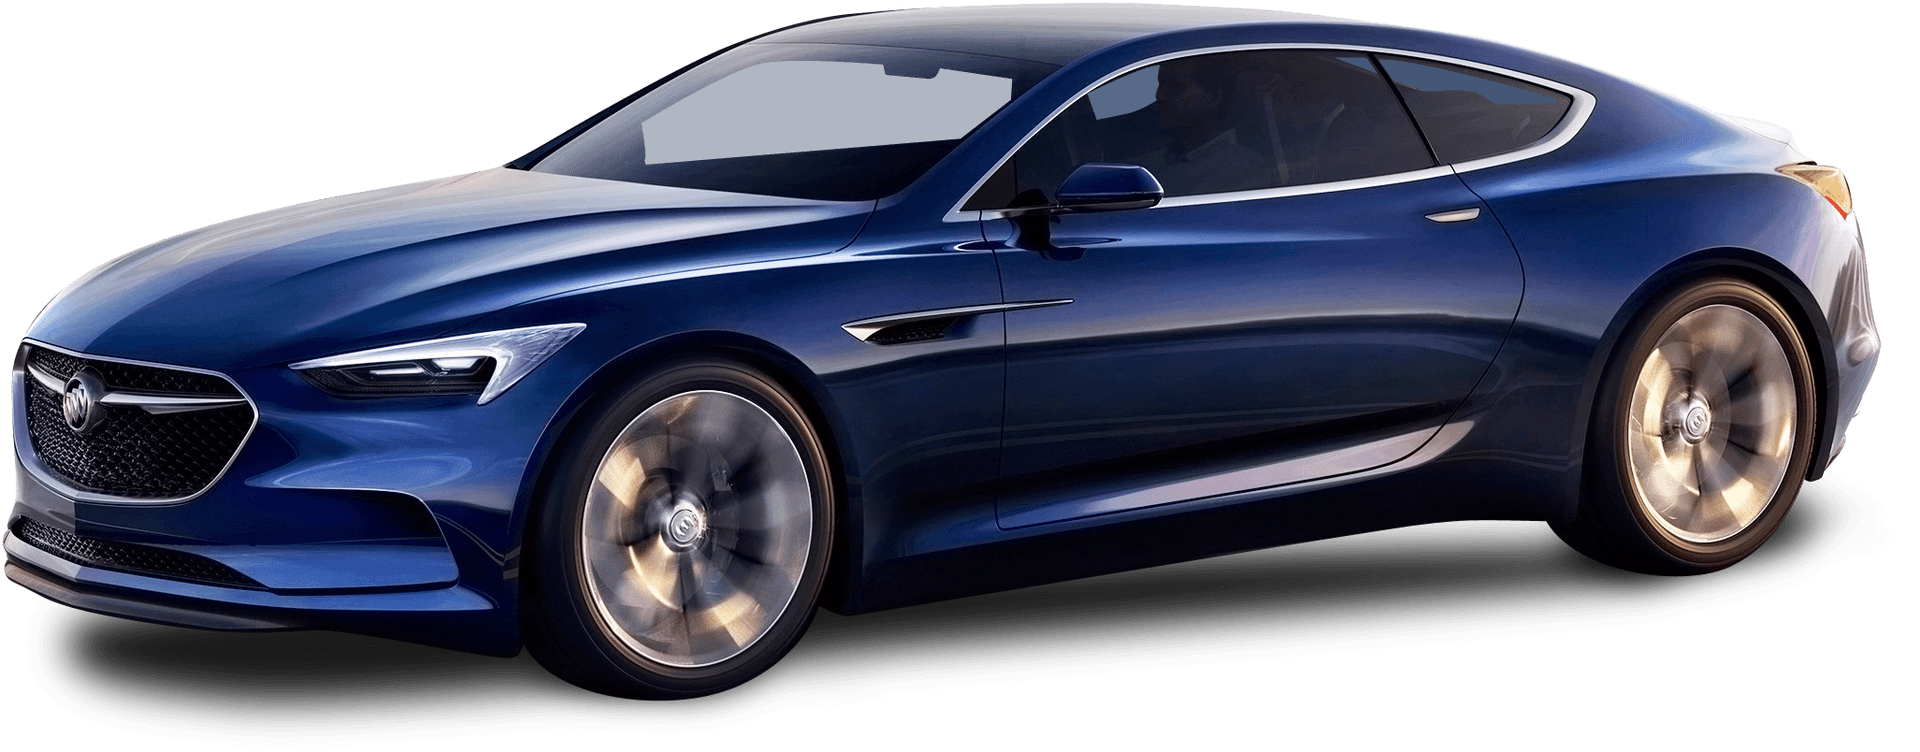 Blue Buick Concept Car Side View PNG